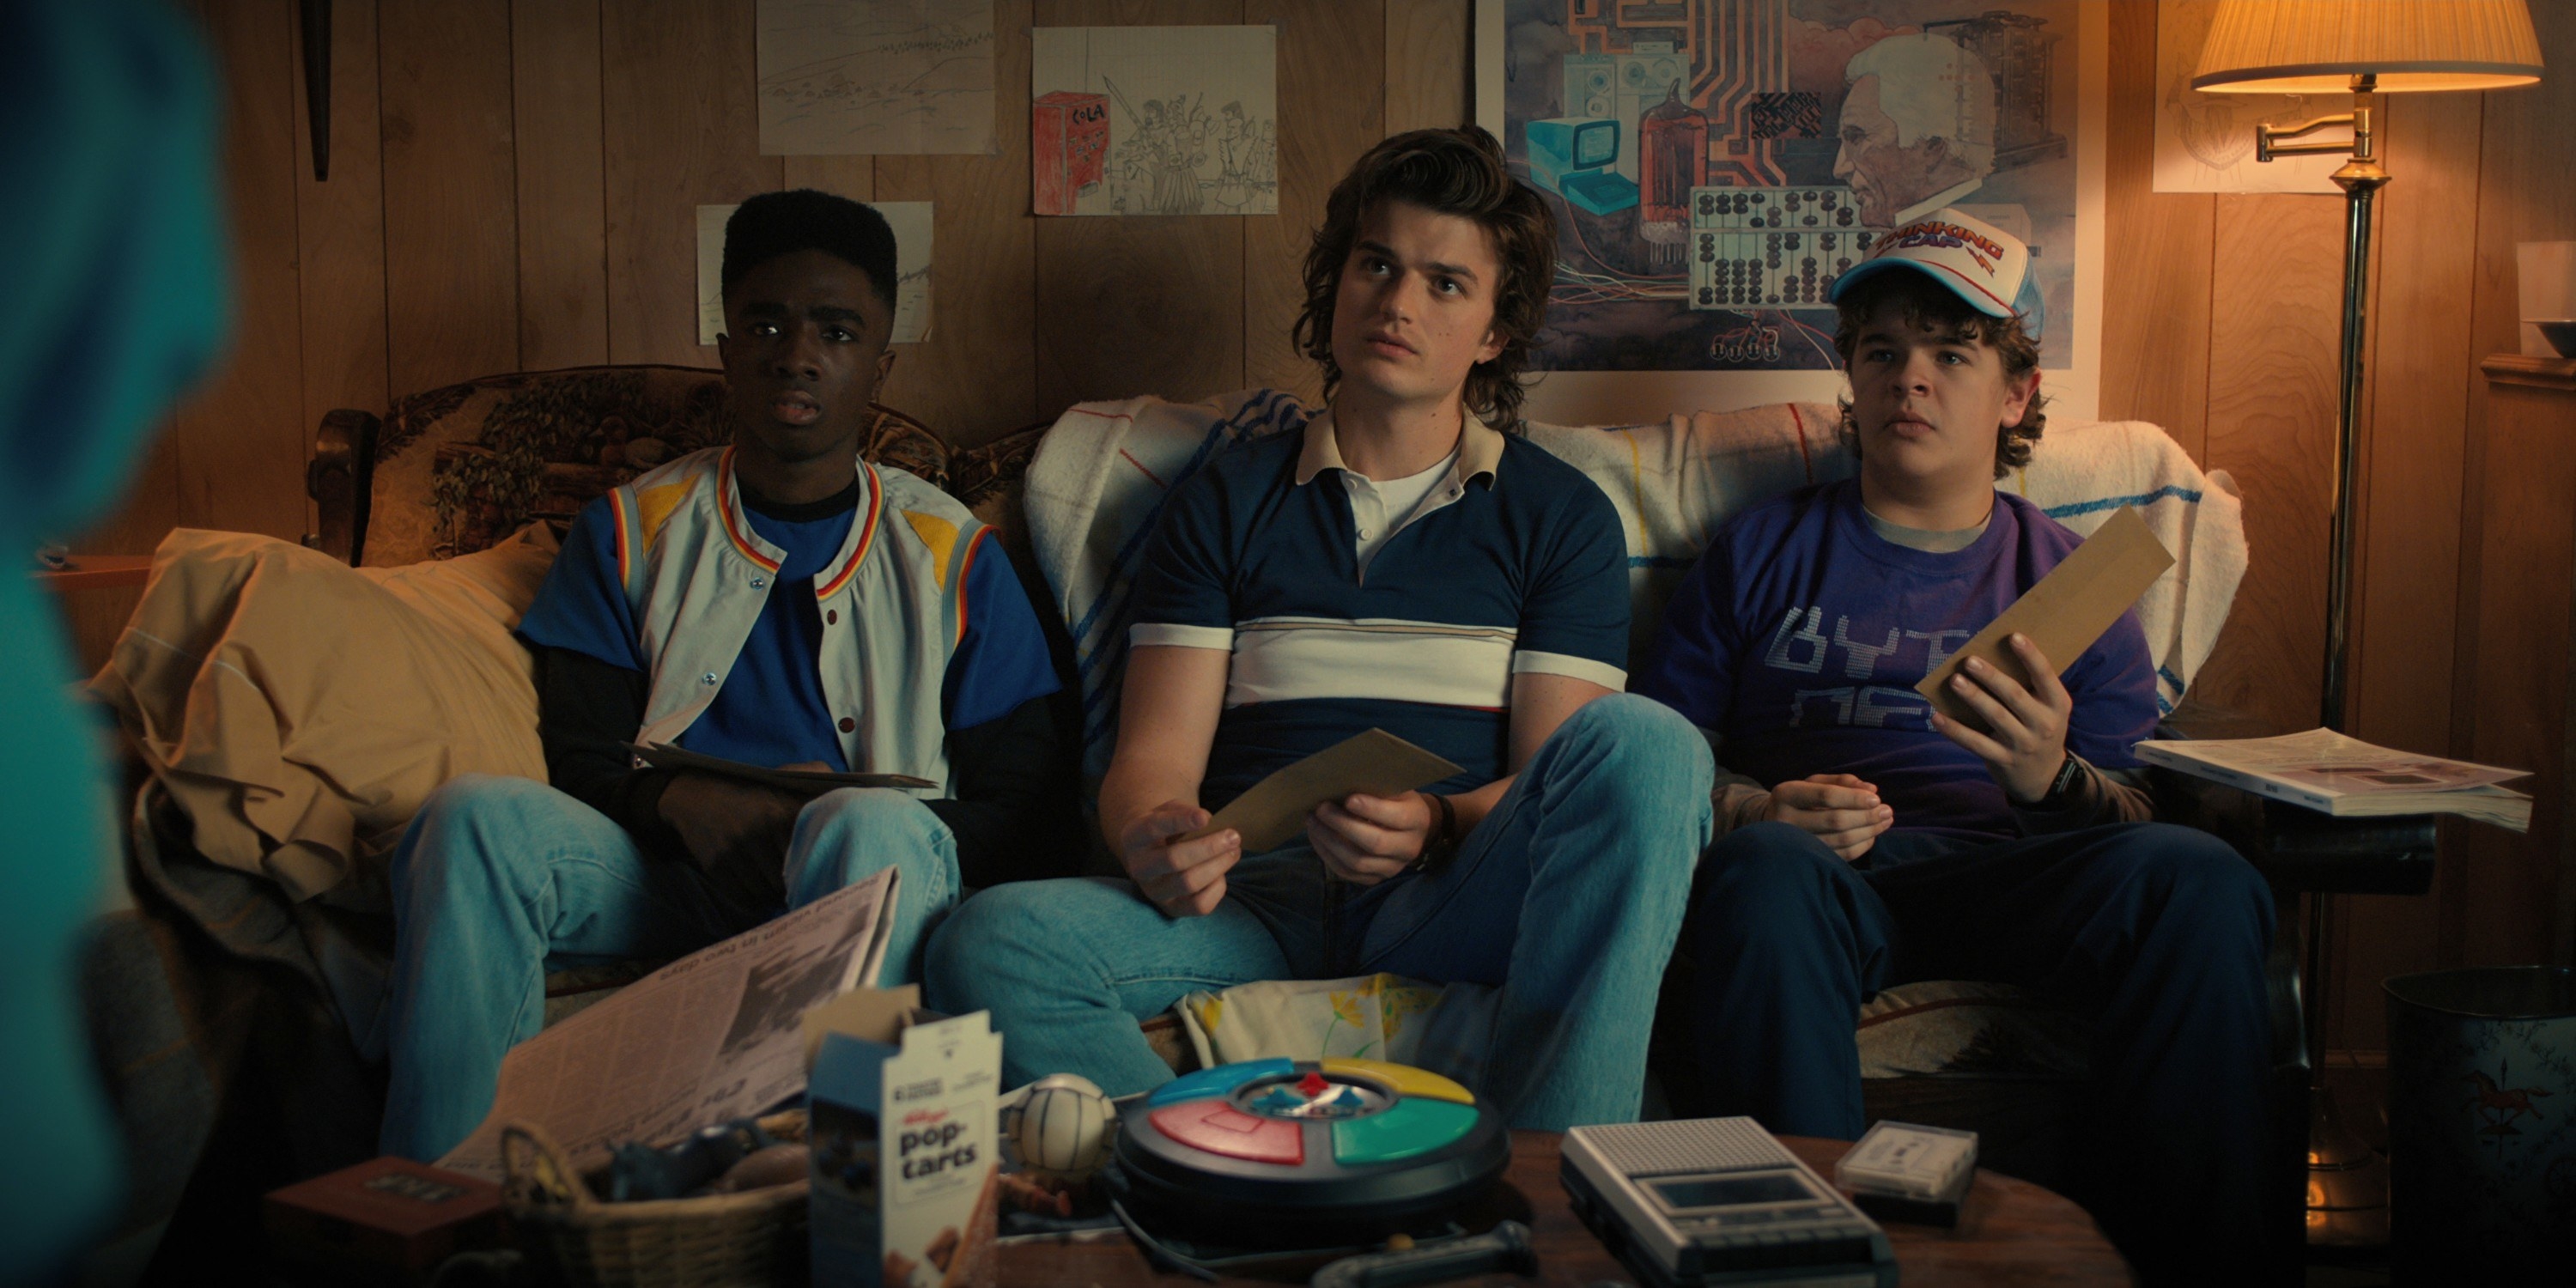 Screen shot from &quot;Stranger Things&quot;